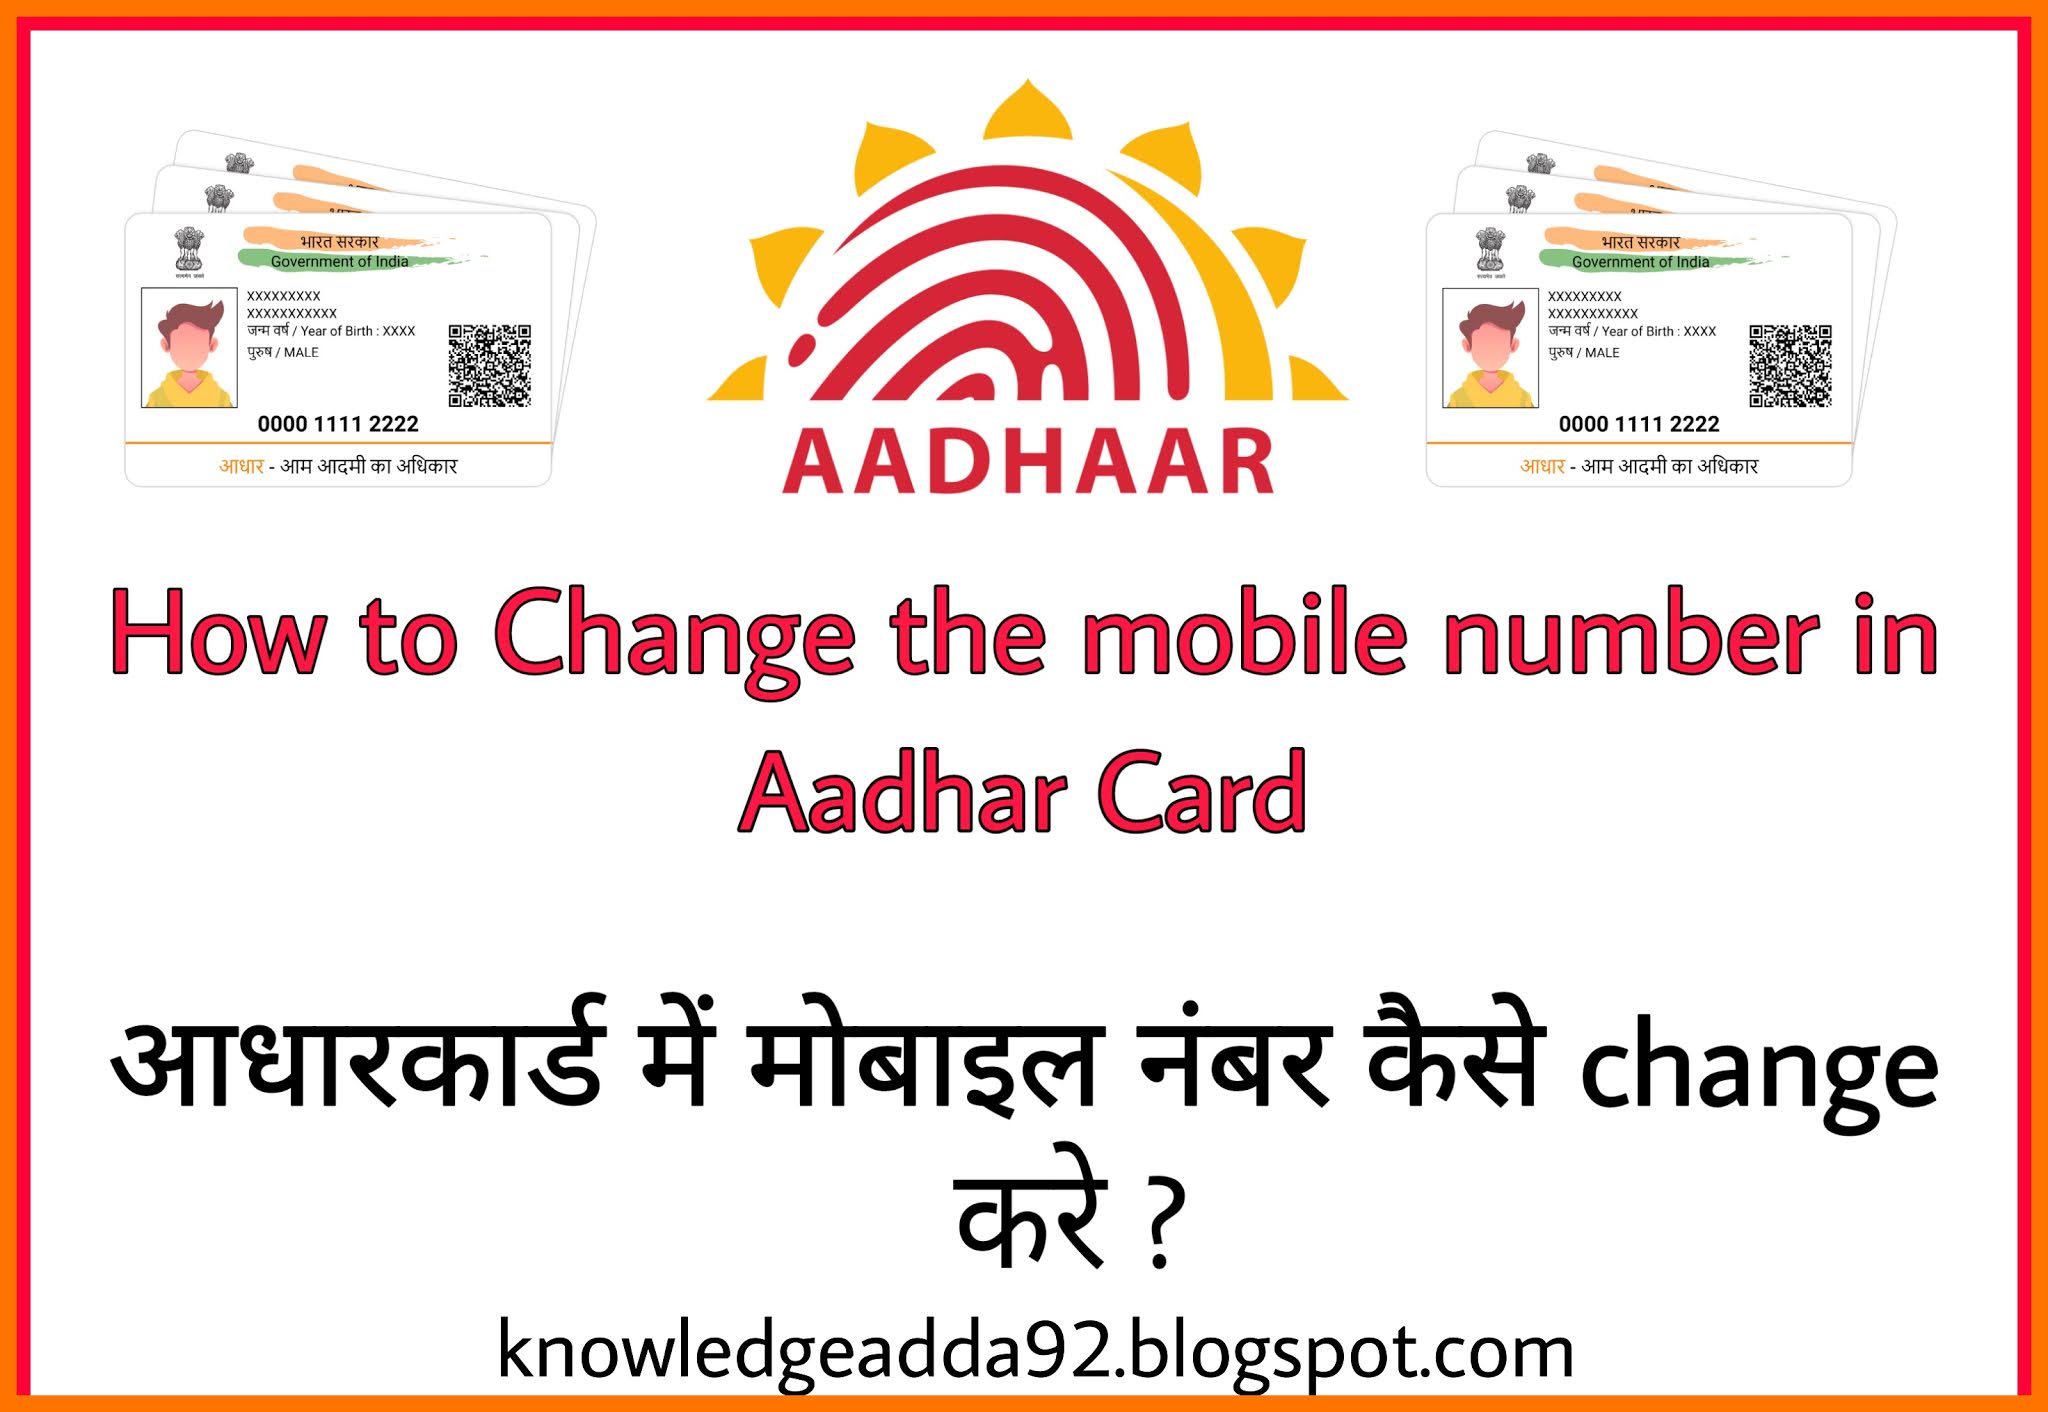 How to change the mobile number in Aadhar card ?